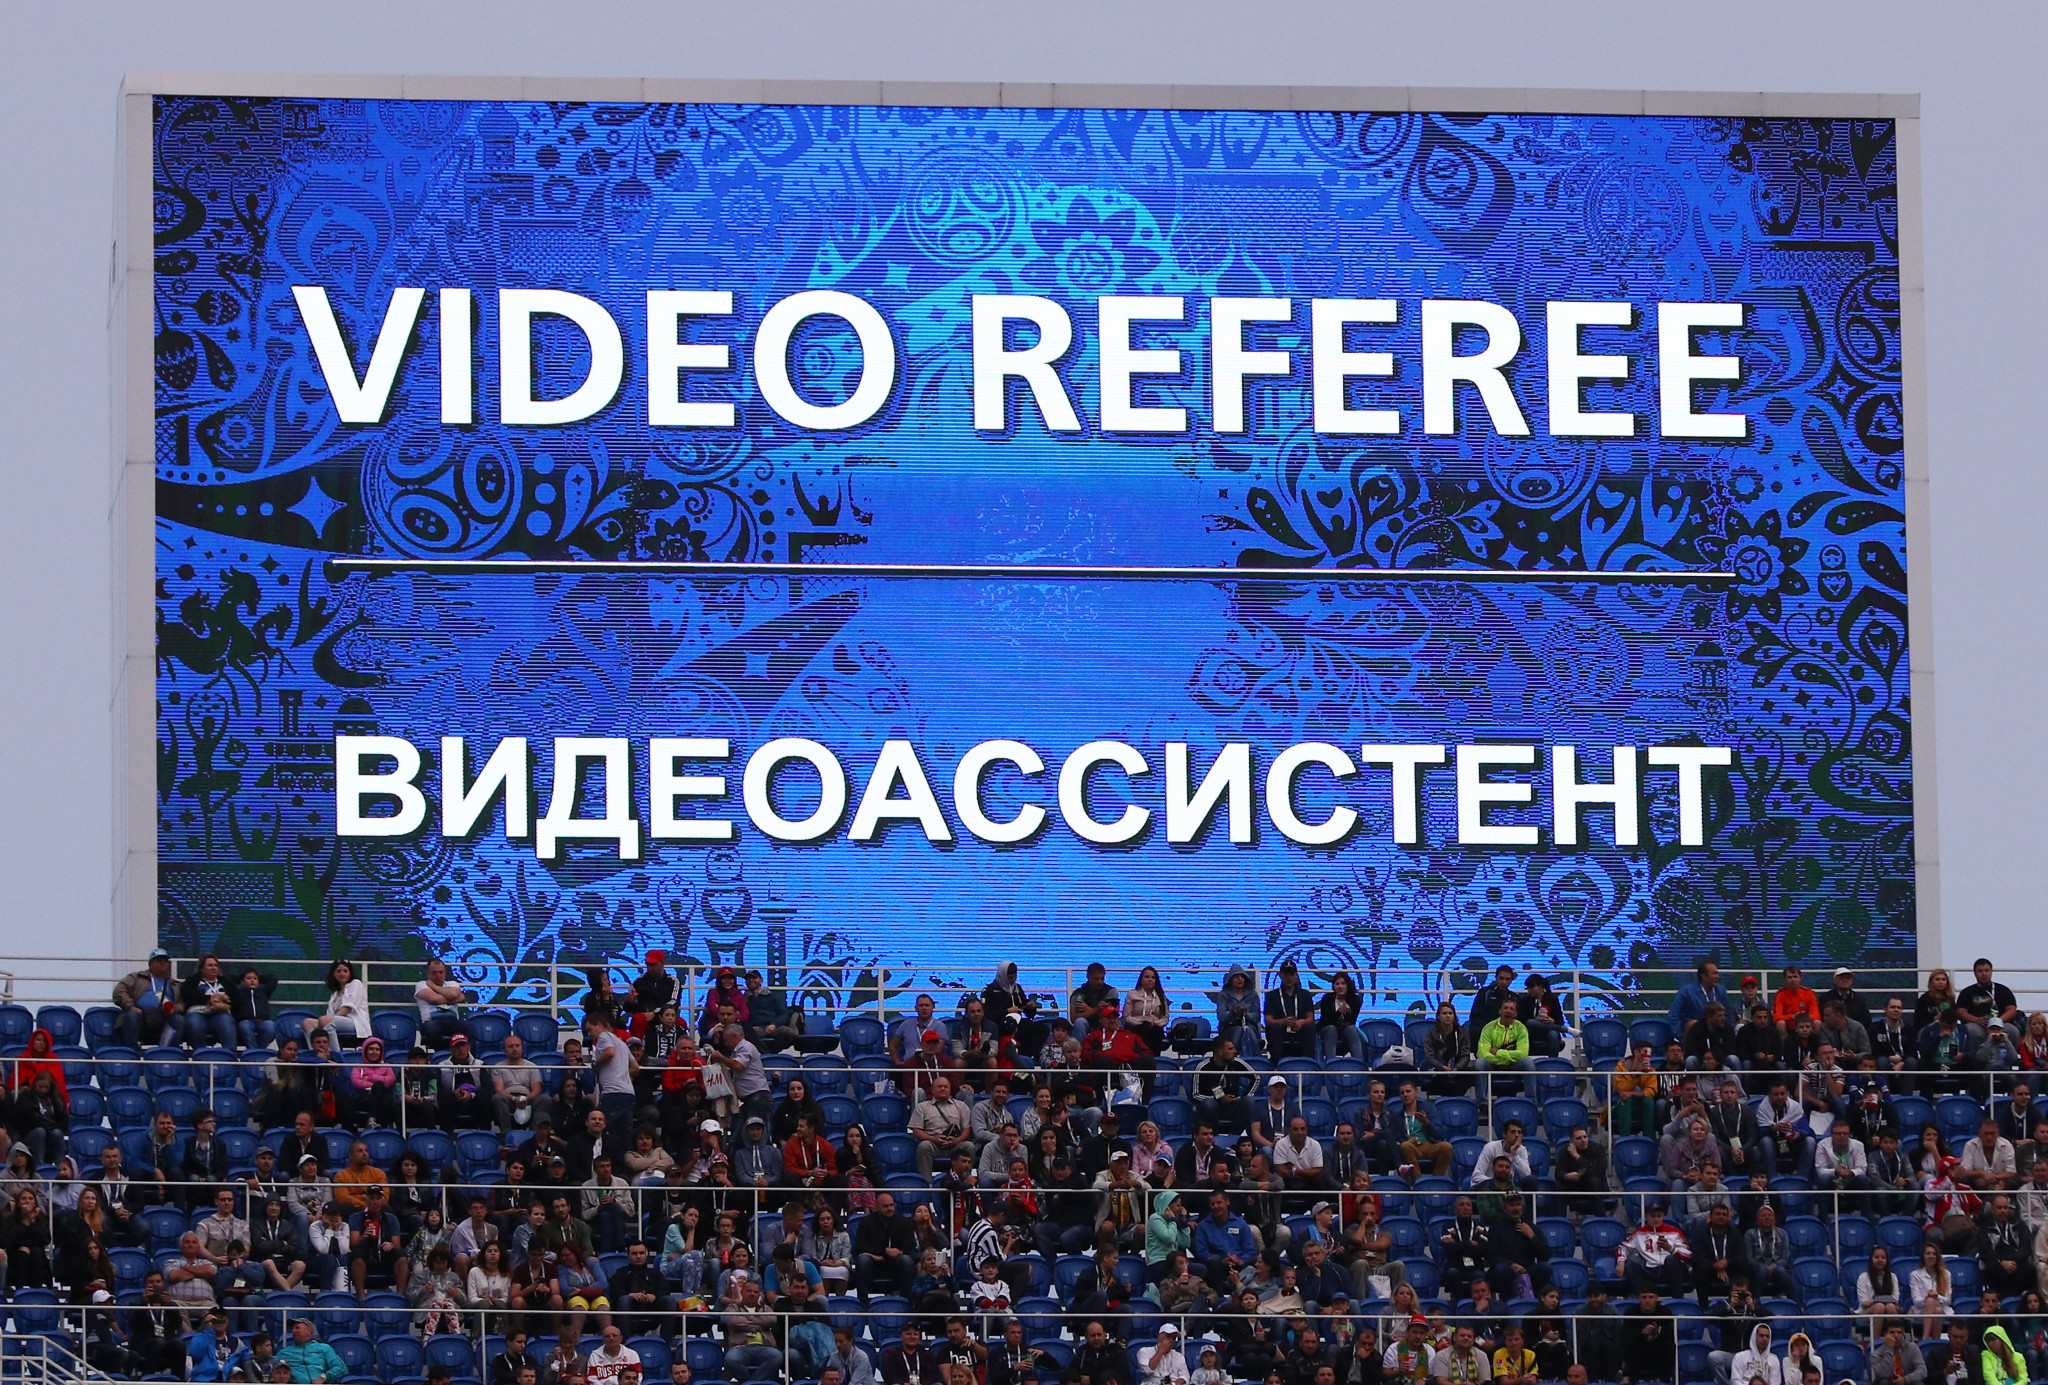 FIFA approve VAR use at 2018 World Cup